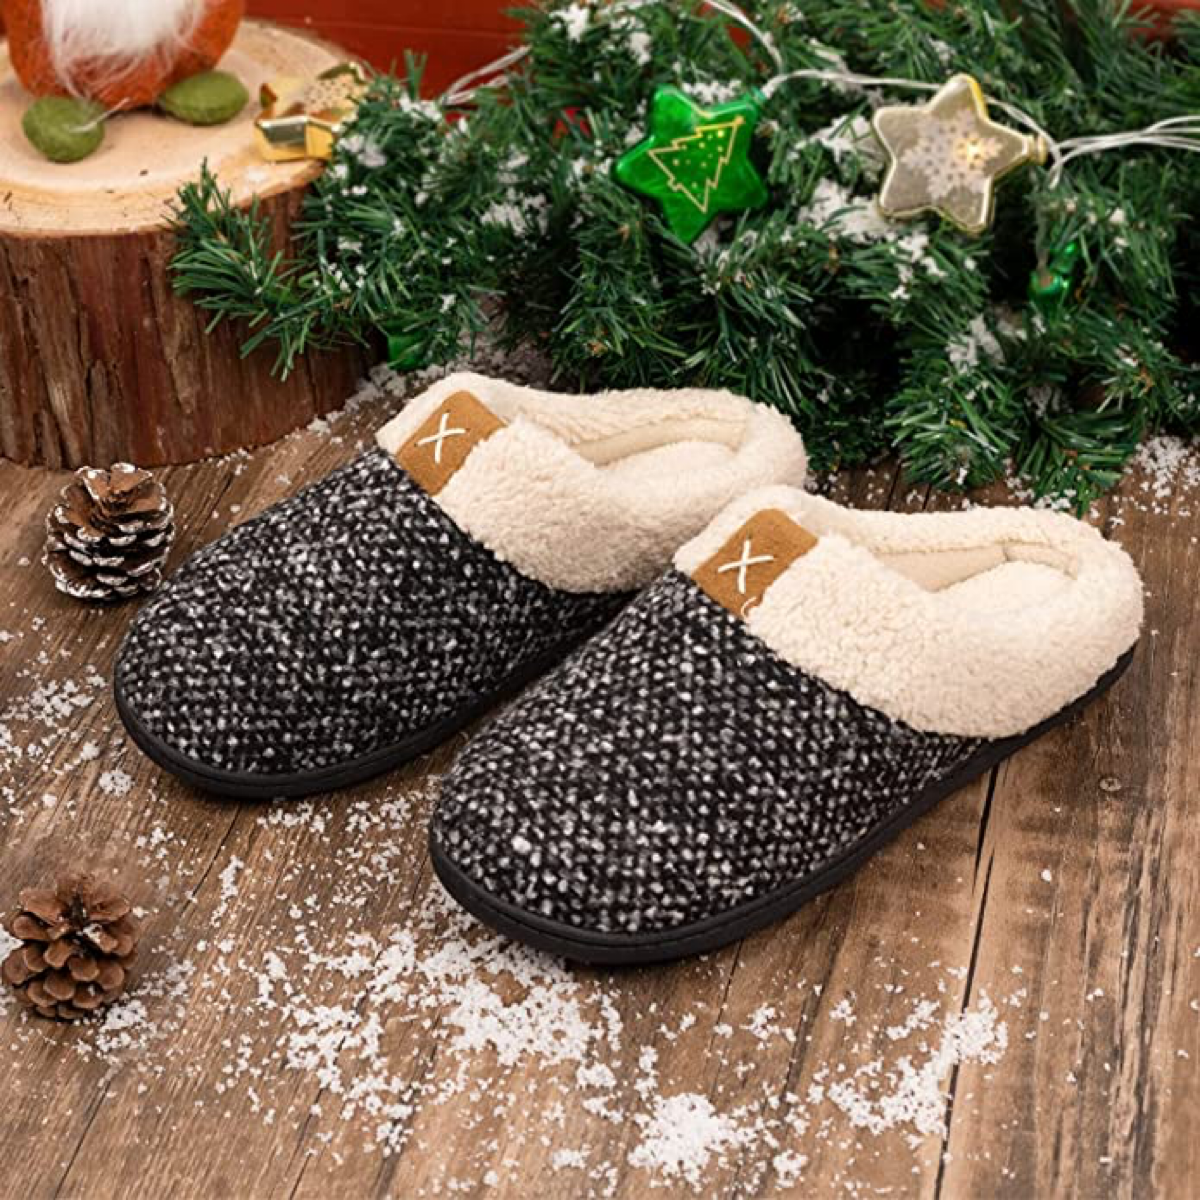 These $27 Sherpa Slippers Amazon Have 35,000+ Five-Star Reviews - E! Online